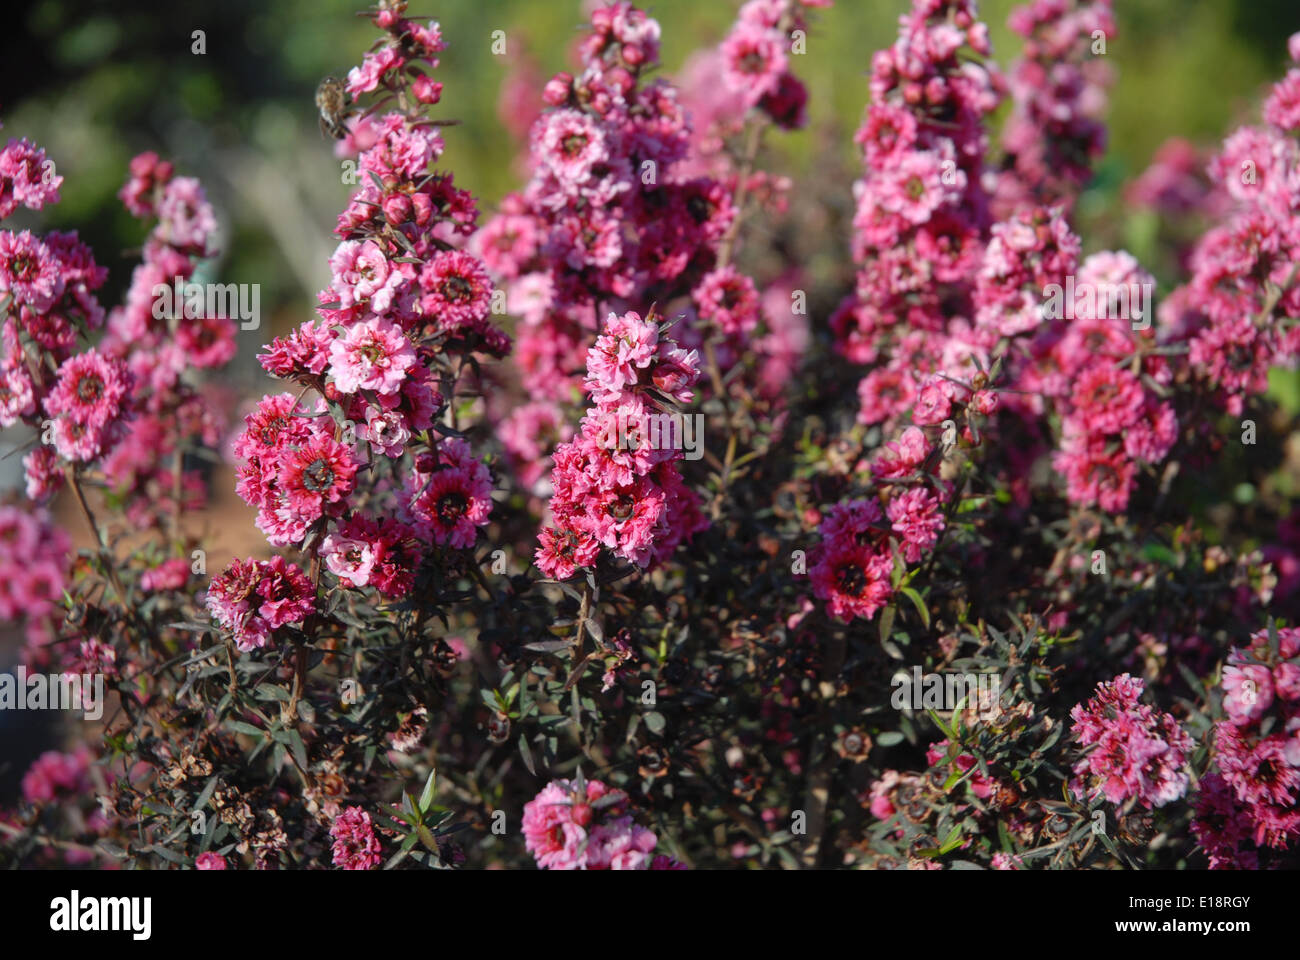 Leptospermum scoparium or Manuka myrtle in flower, commonly called New Zealand teatree, native to Australia  and New Zealand Stock Photo